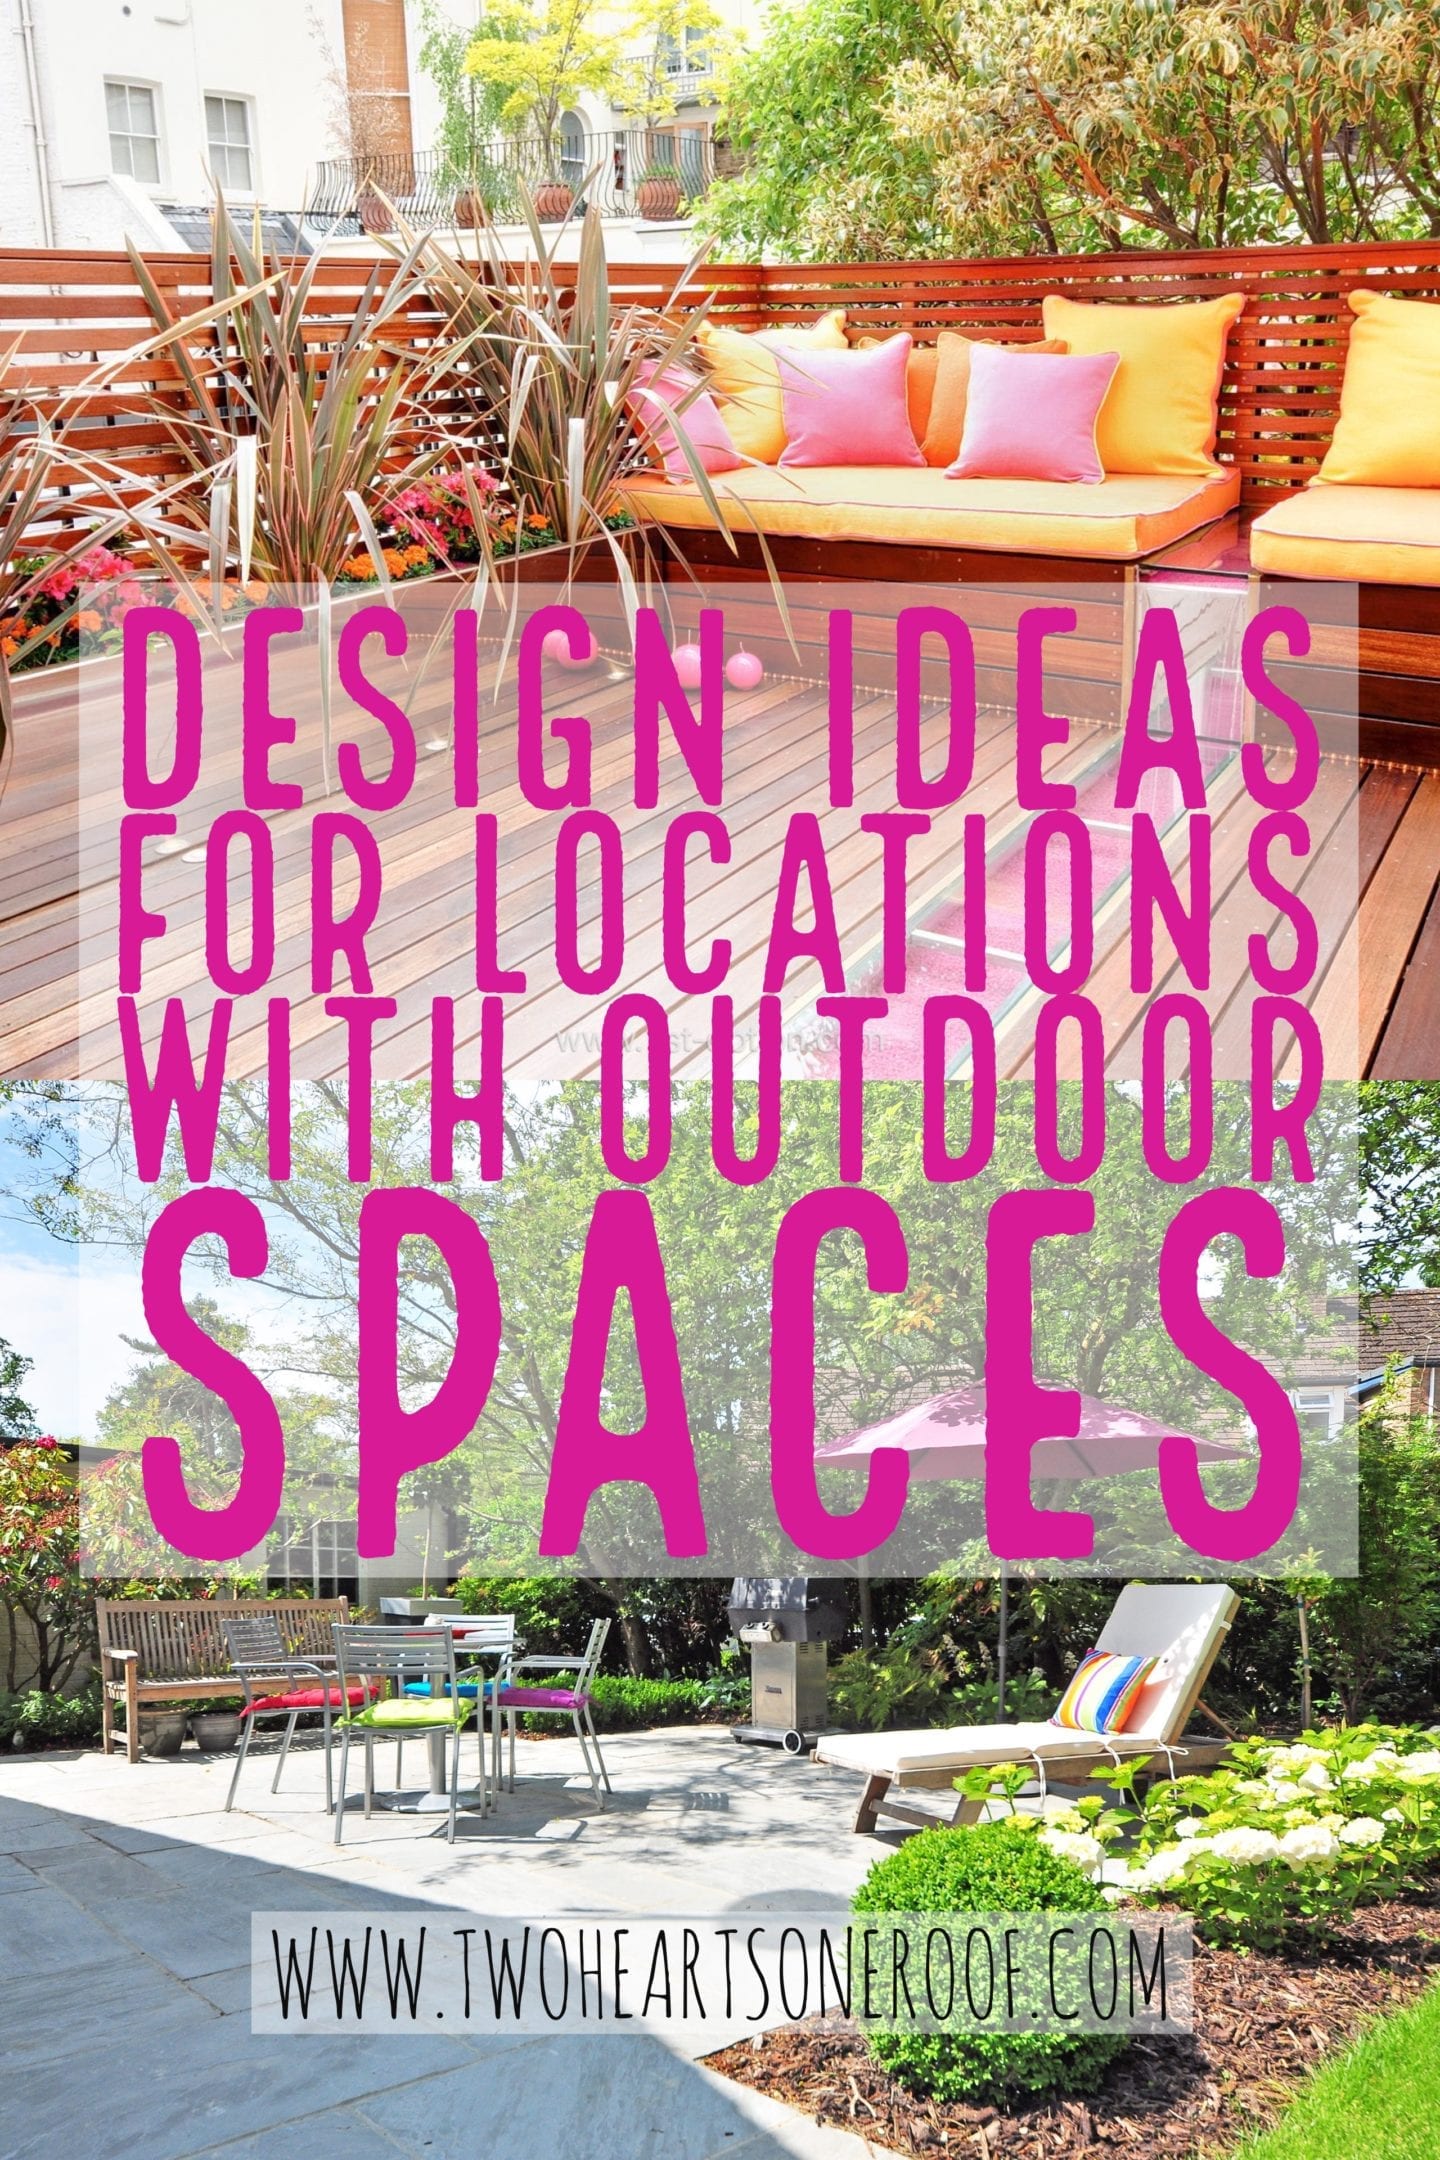 Design ideas for locations with outdoor spaces